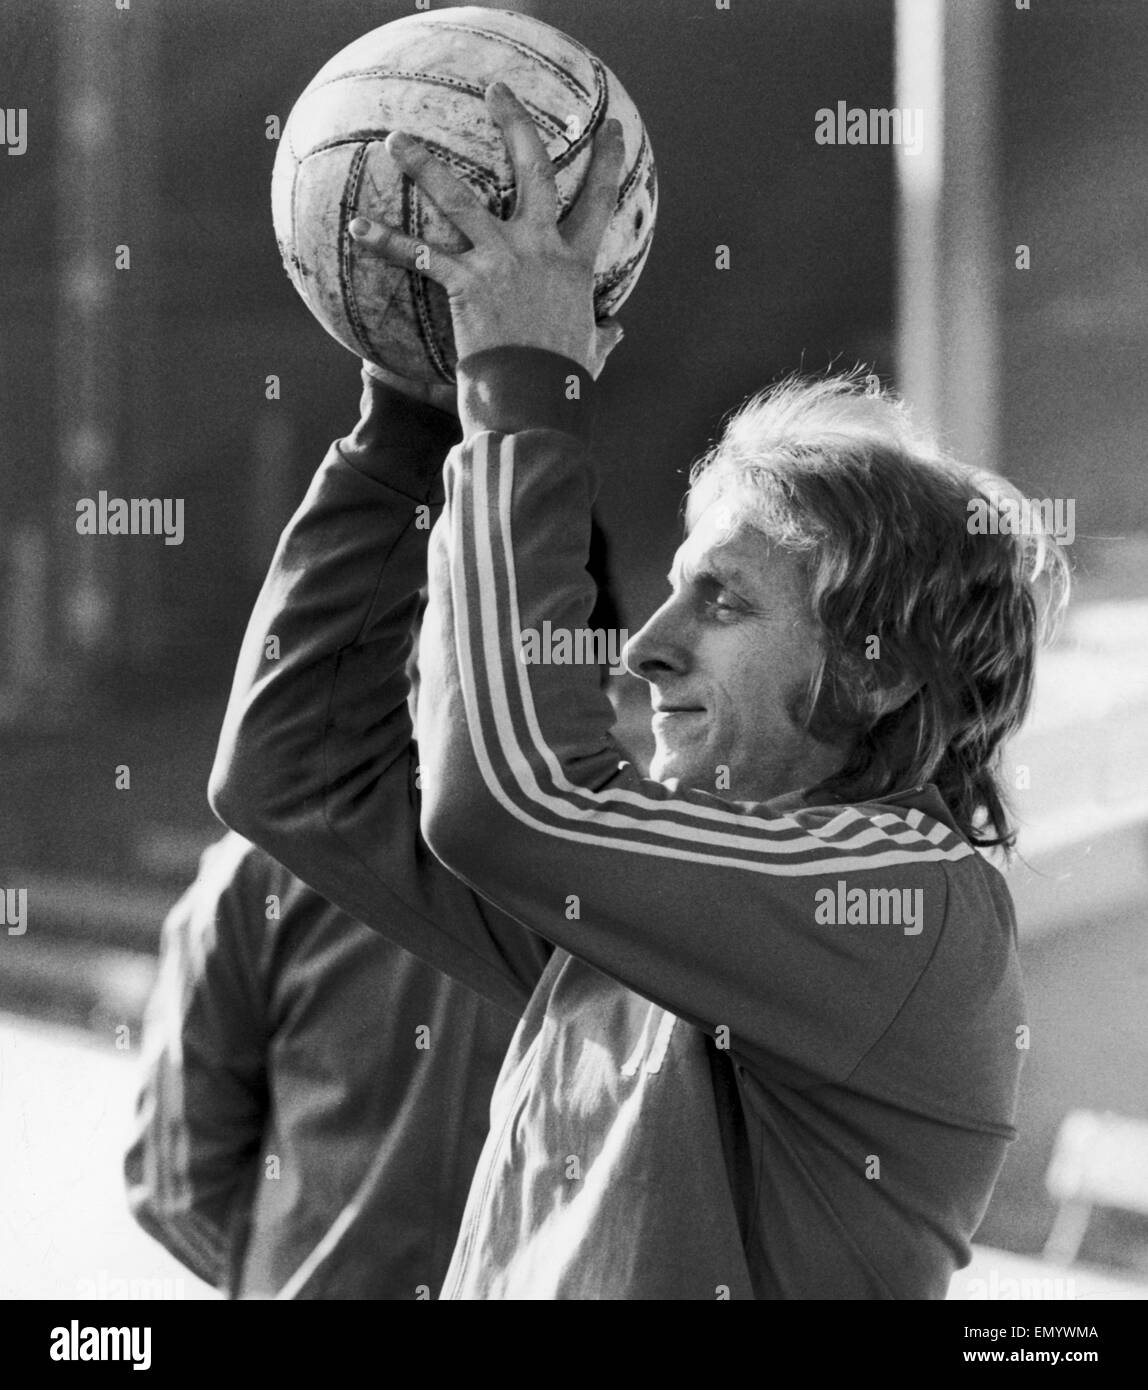 Denis Law 34 seen here training as Manchester City enter the run in to their League Cup final date with Wolves. Law can be seen in this picture trying his hand at goalkeeping during a training session. 24th February 1974 Stock Photo